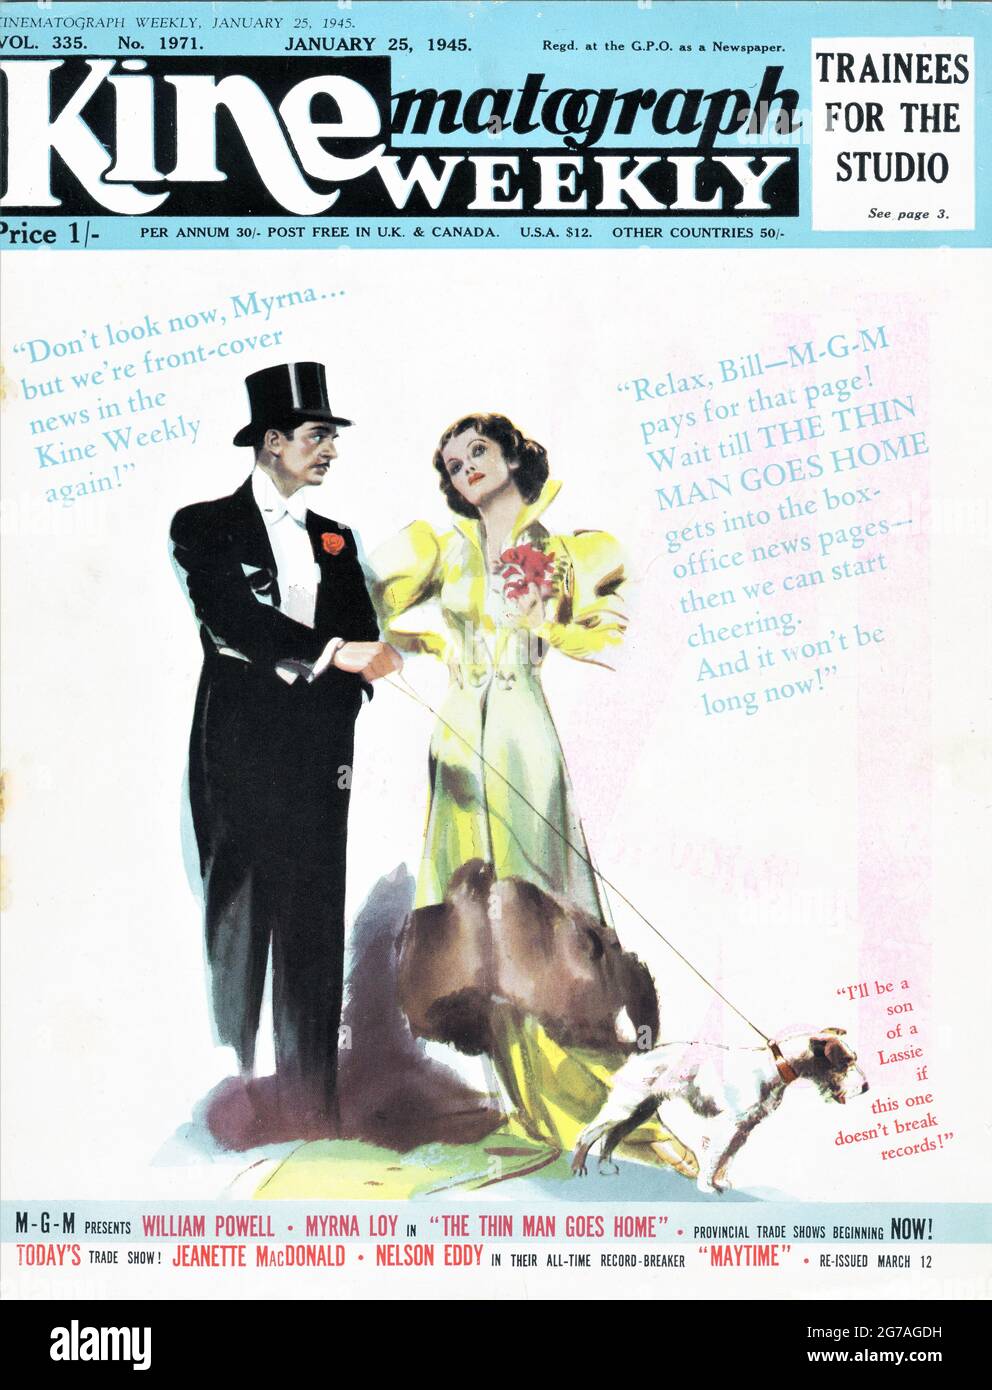 British Trade Ad for WILLIAM POWELL and MYRNA LOY as Nick and Nora Charles with ASTA the Dog in THE THIN MAN GOES HOME 1944 director RICHARD THORPE based on characters created by Dashiell Hammett original story Robert Riskin and Harry Kurnitz screenplay Robert Riskin and Dwight Taylor Metro Goldwyn Mayer Stock Photo